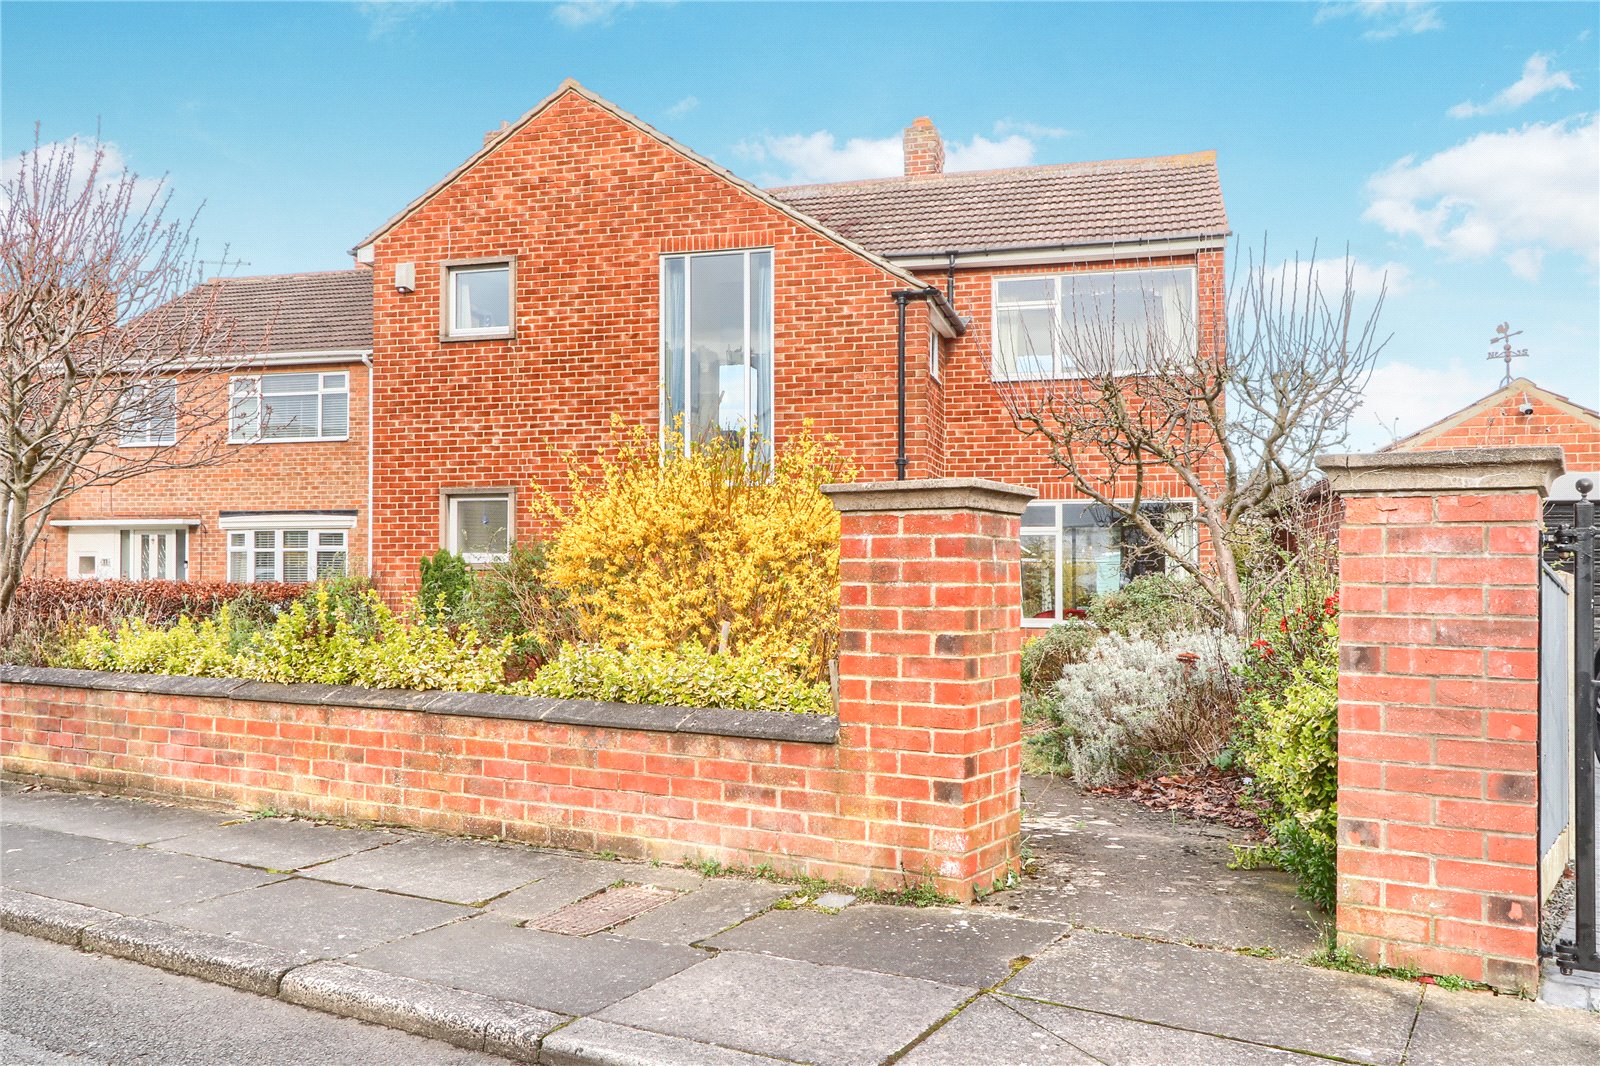 3 bed house for sale in Whitehouse Drive, Fairfield 1